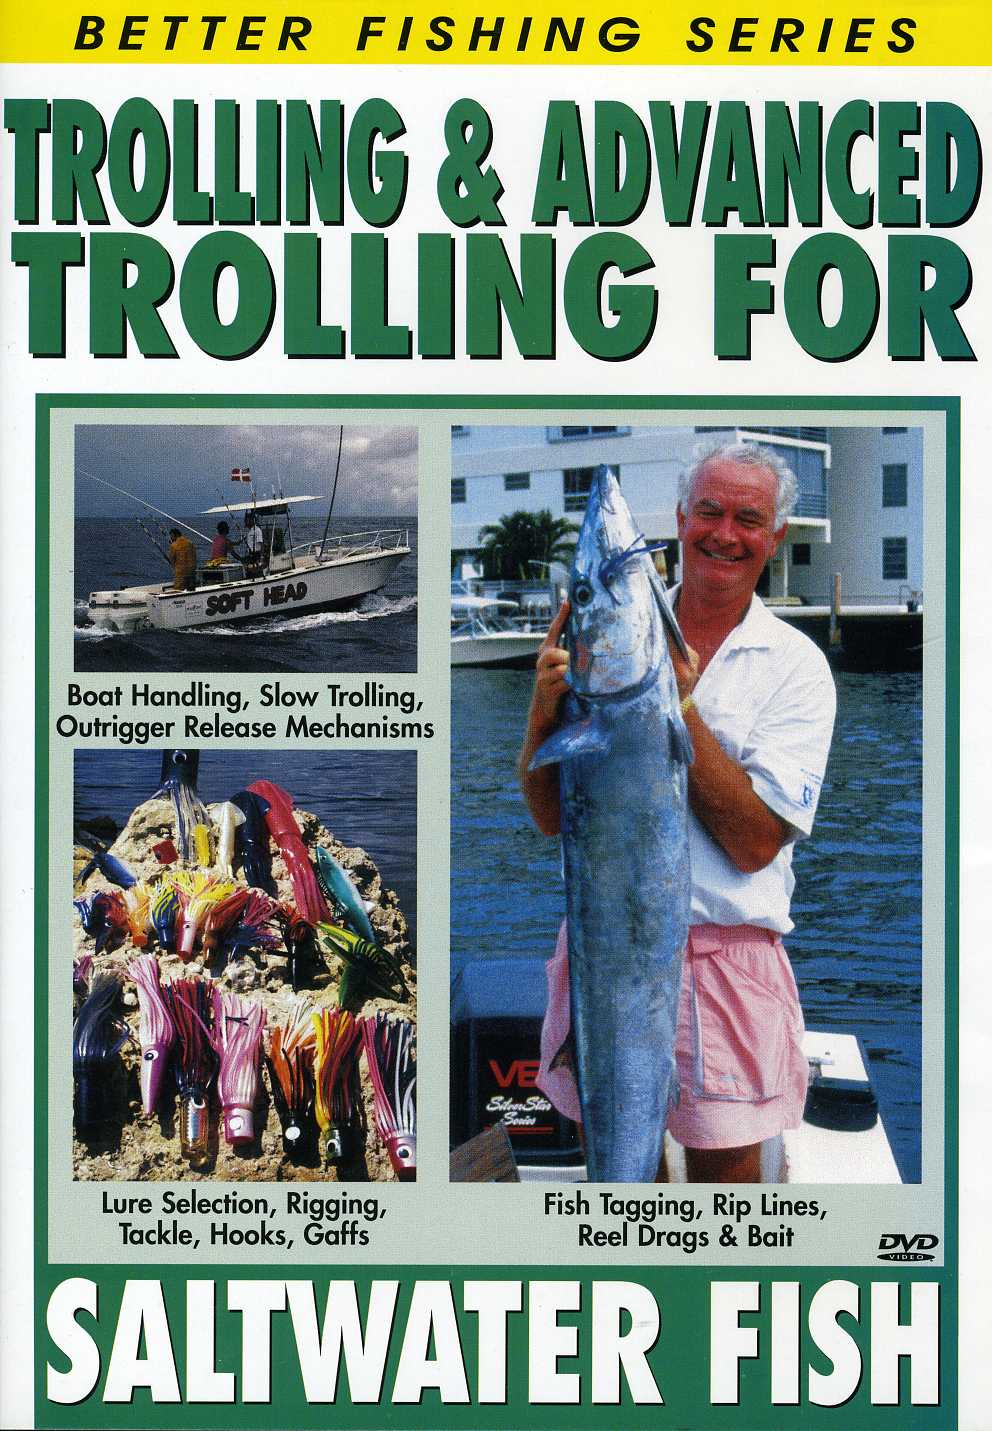 TROLLING & ADVANCED TROLLING FOR SALTWATER FISH